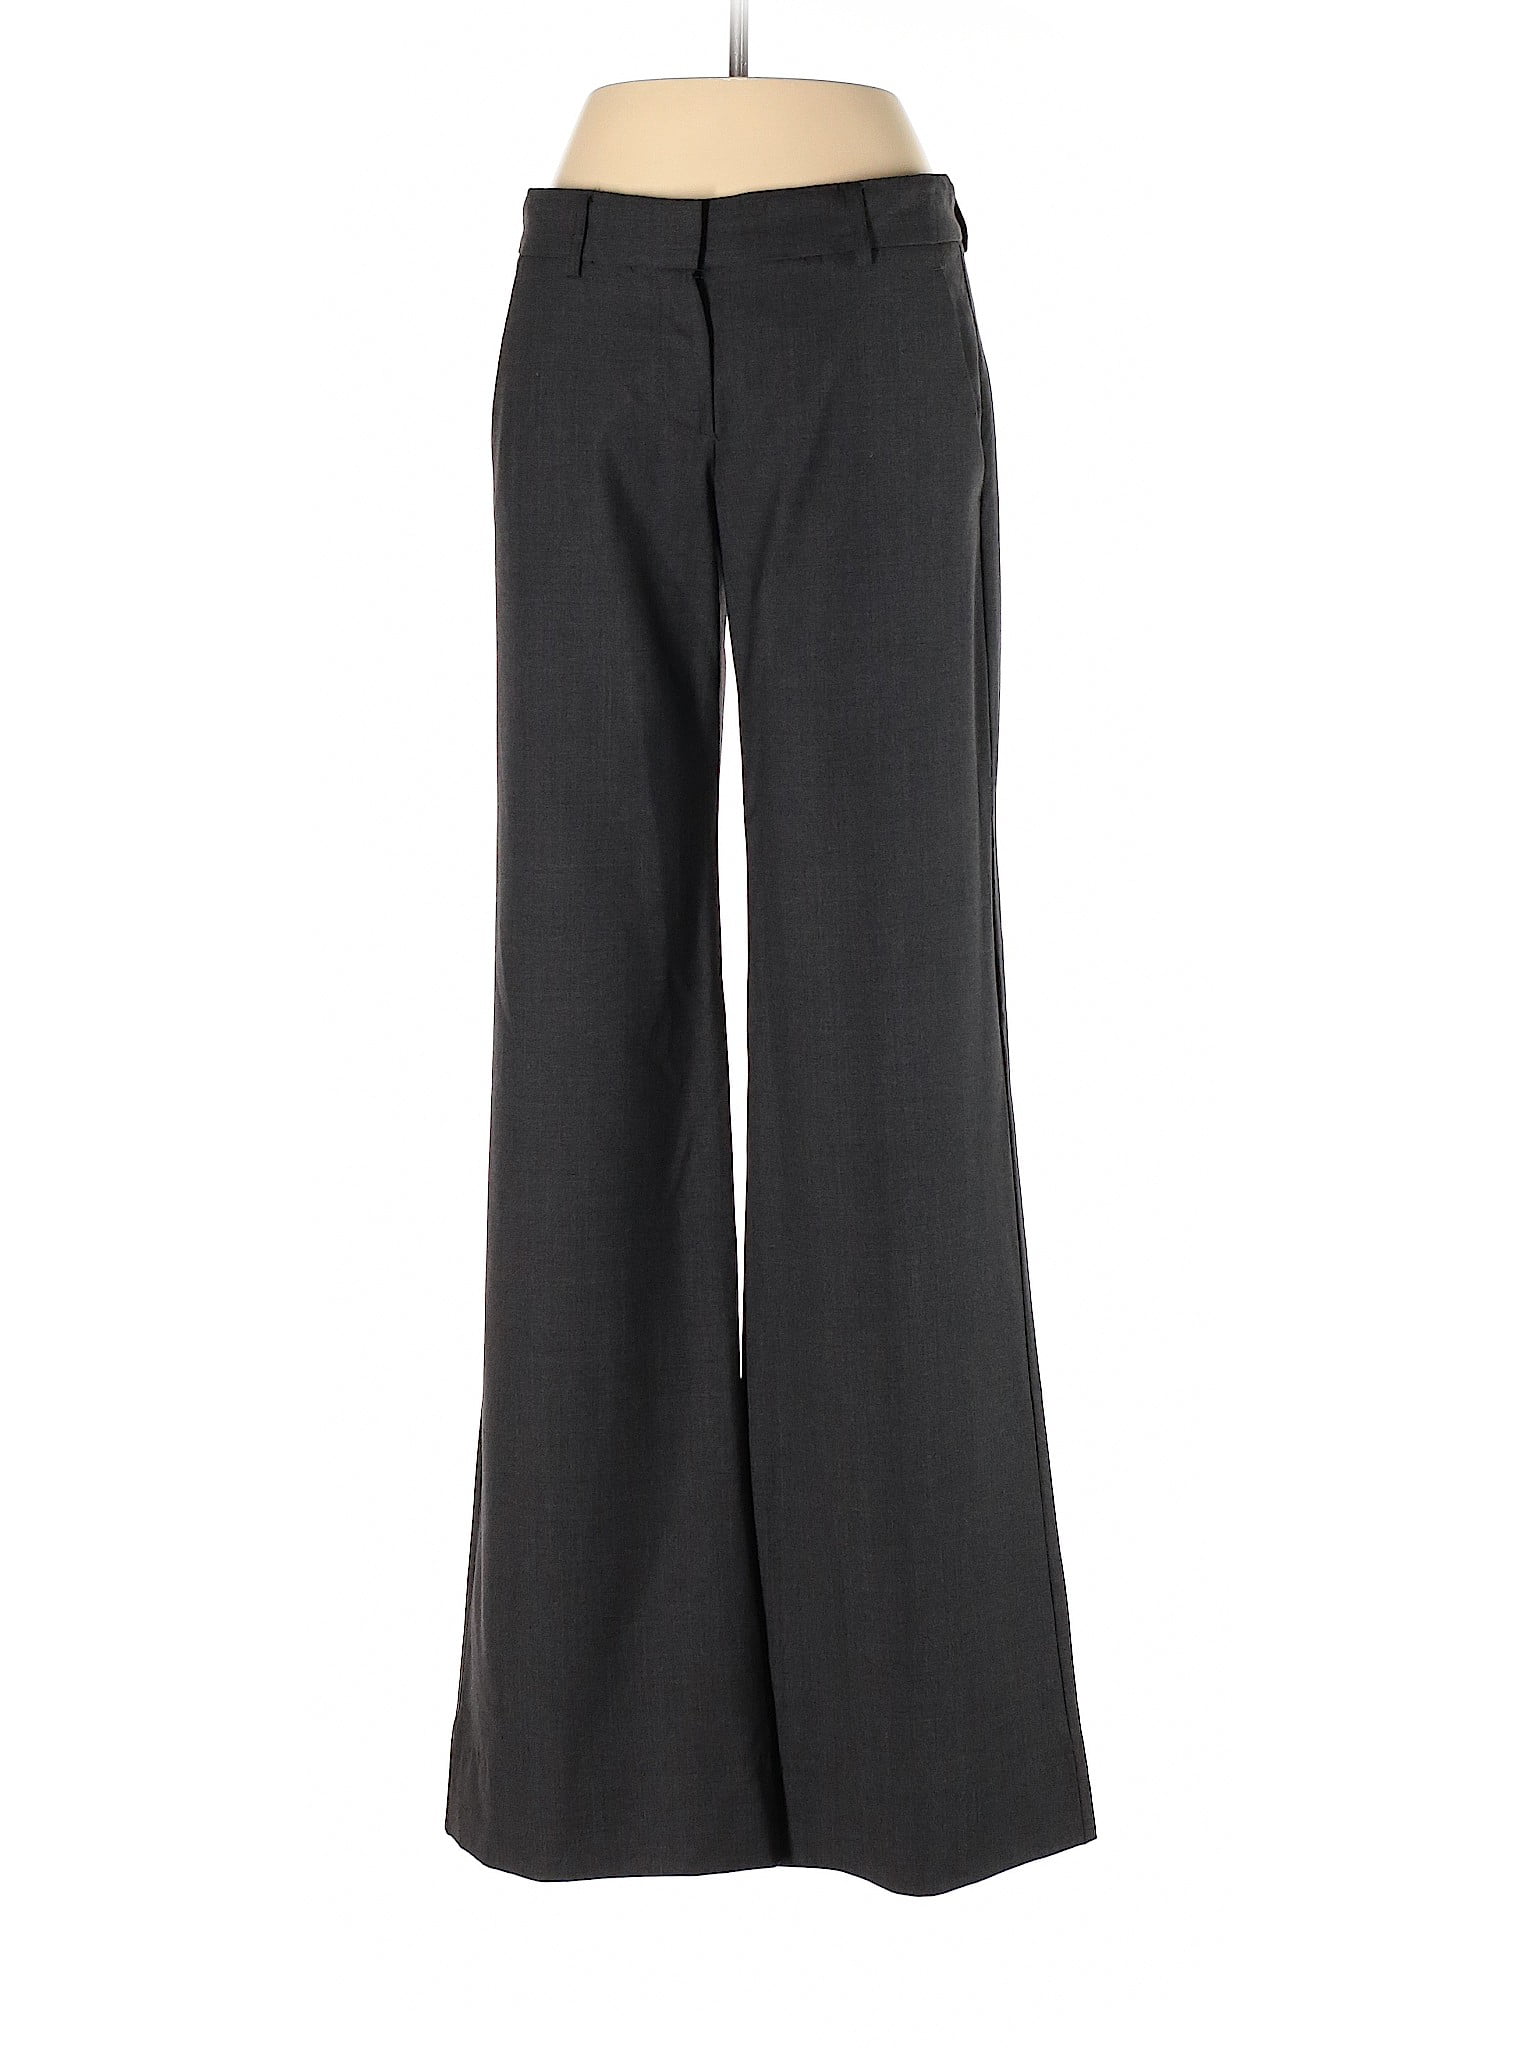 Theory - Pre-Owned Theory Women's Size 2 Wool Pants - Walmart.com ...